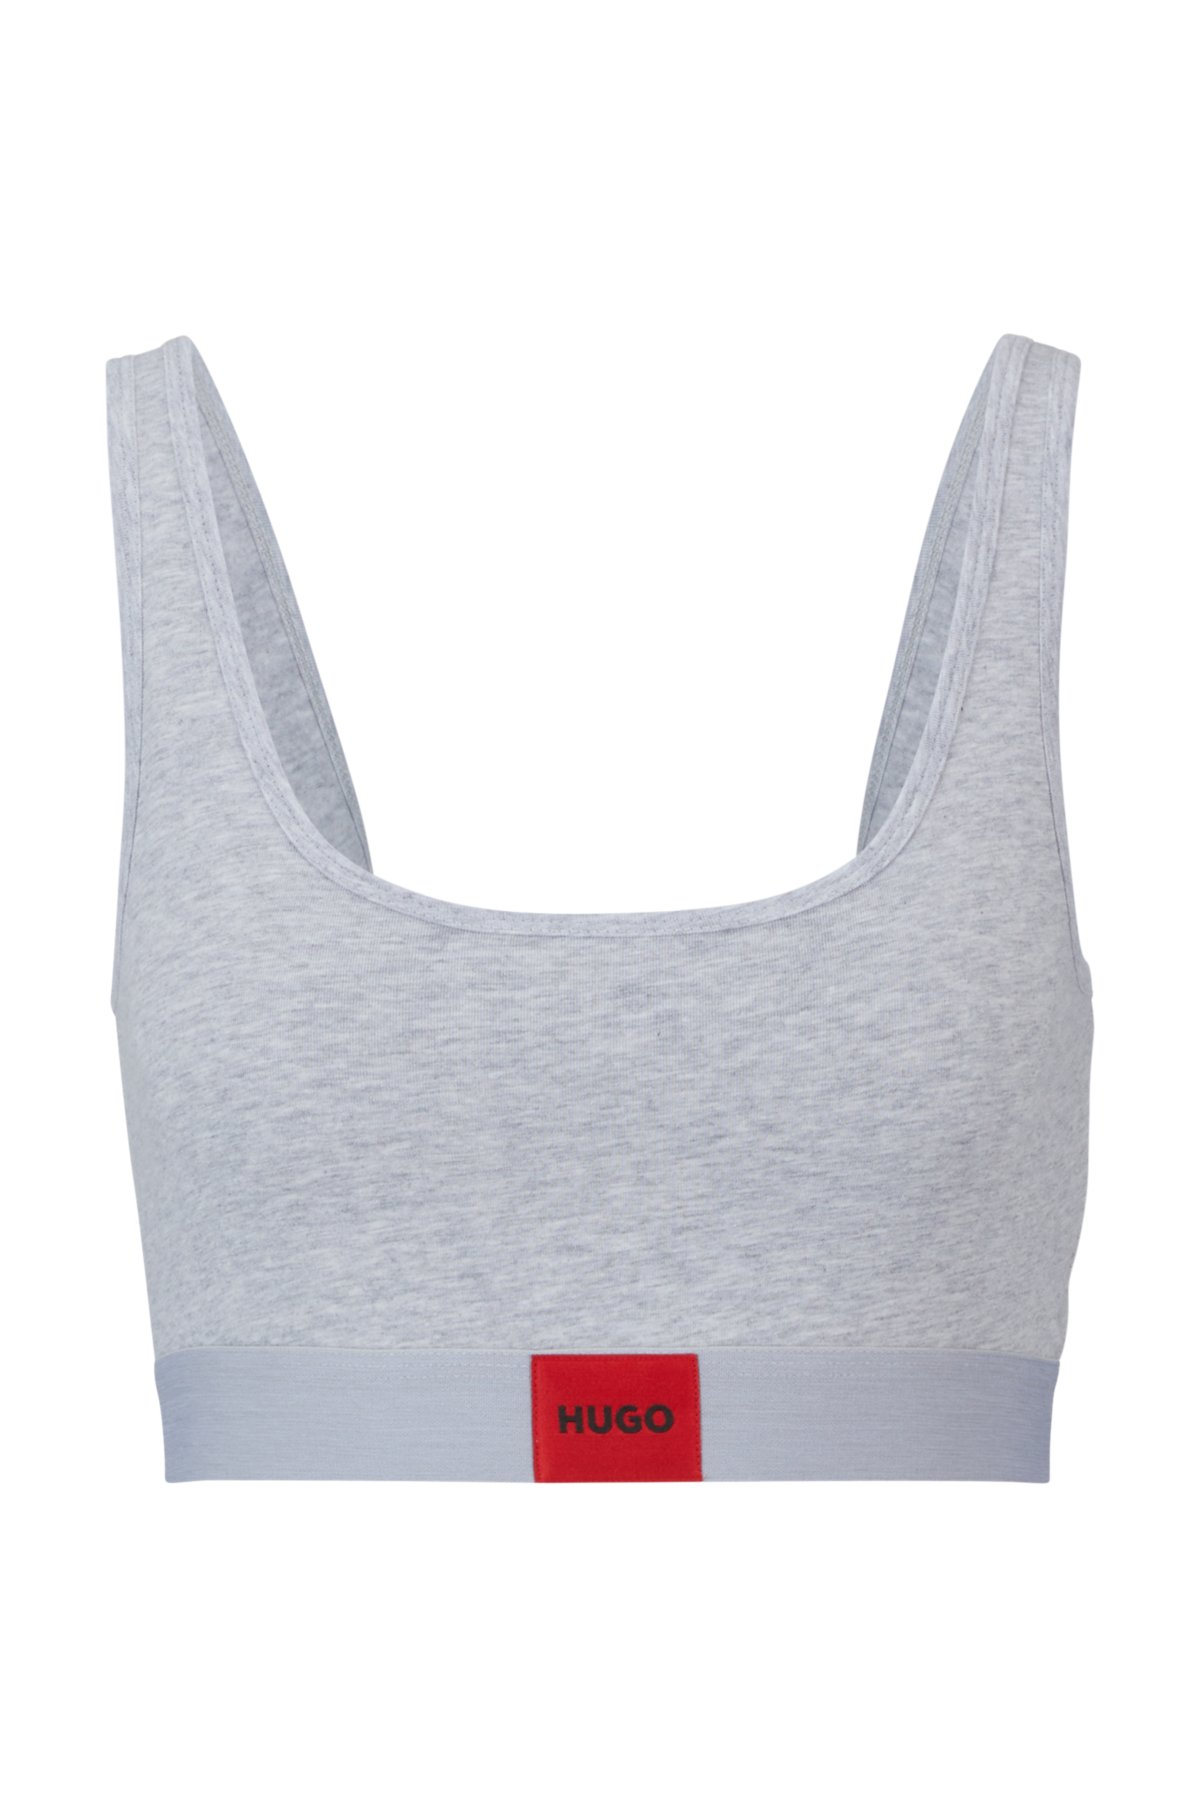 HUGO - Stretch-cotton bralette with red label logo